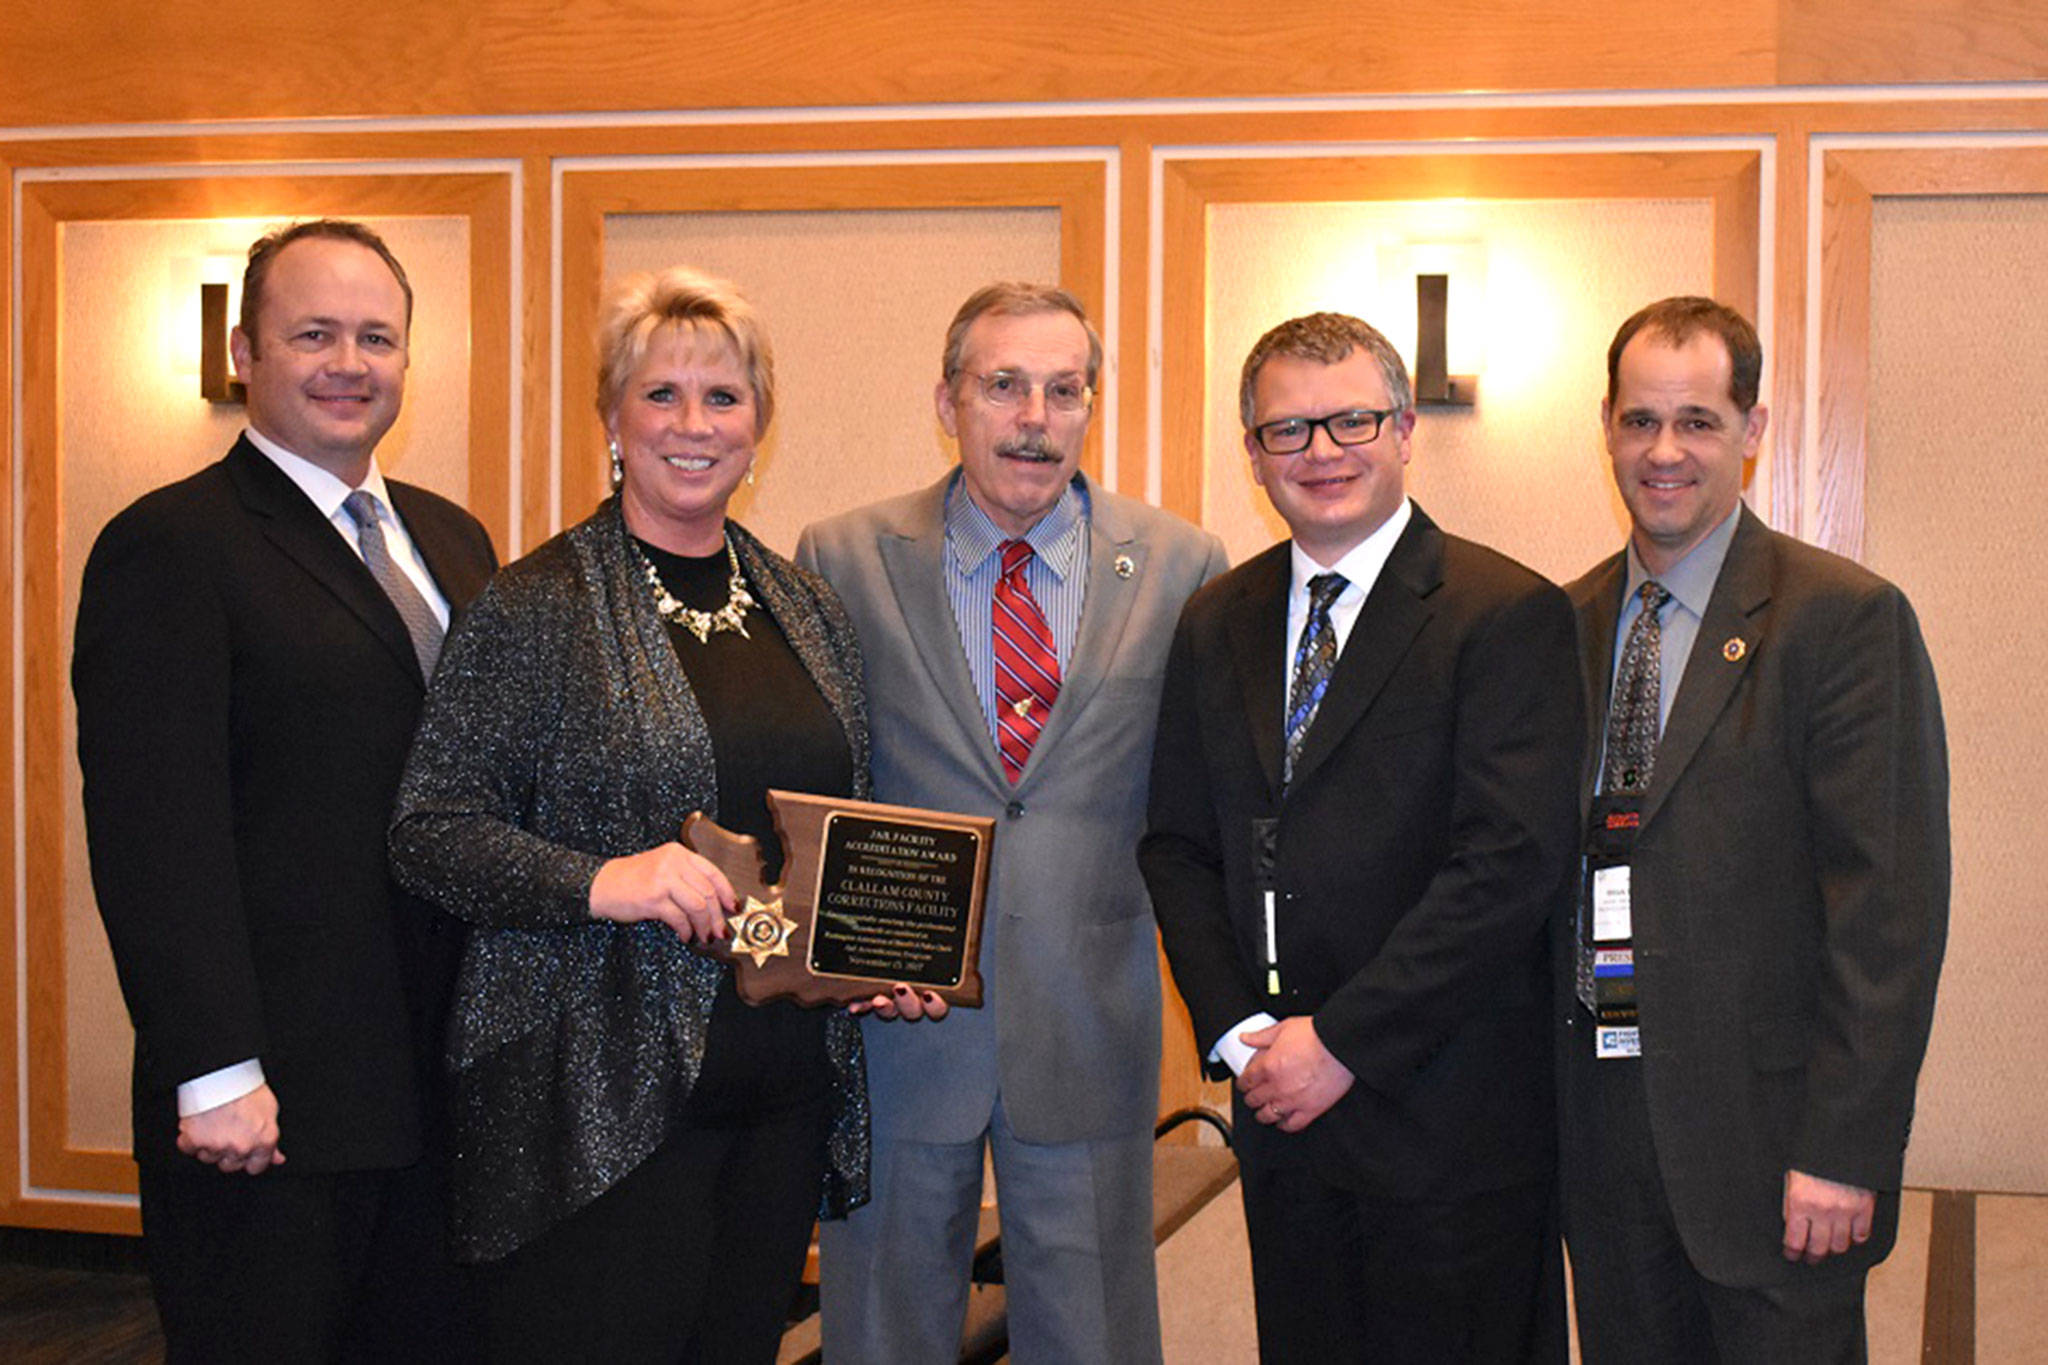 Representatives with the Clallam County Sheriff’s Office gather for a photo after receiving accreditation for the Corrections Department at the WASPC awards banquet on Nov. 15. Those at the event include, from left, Corrections Sgt. Don Wenzl, Chief Corrections Deputy Wendy Peterson, Sheriff Bill Benedict, Chief Criminal Deputy Brian King, and Sheriff Brian Burnett (WASPC President). Submitted photo